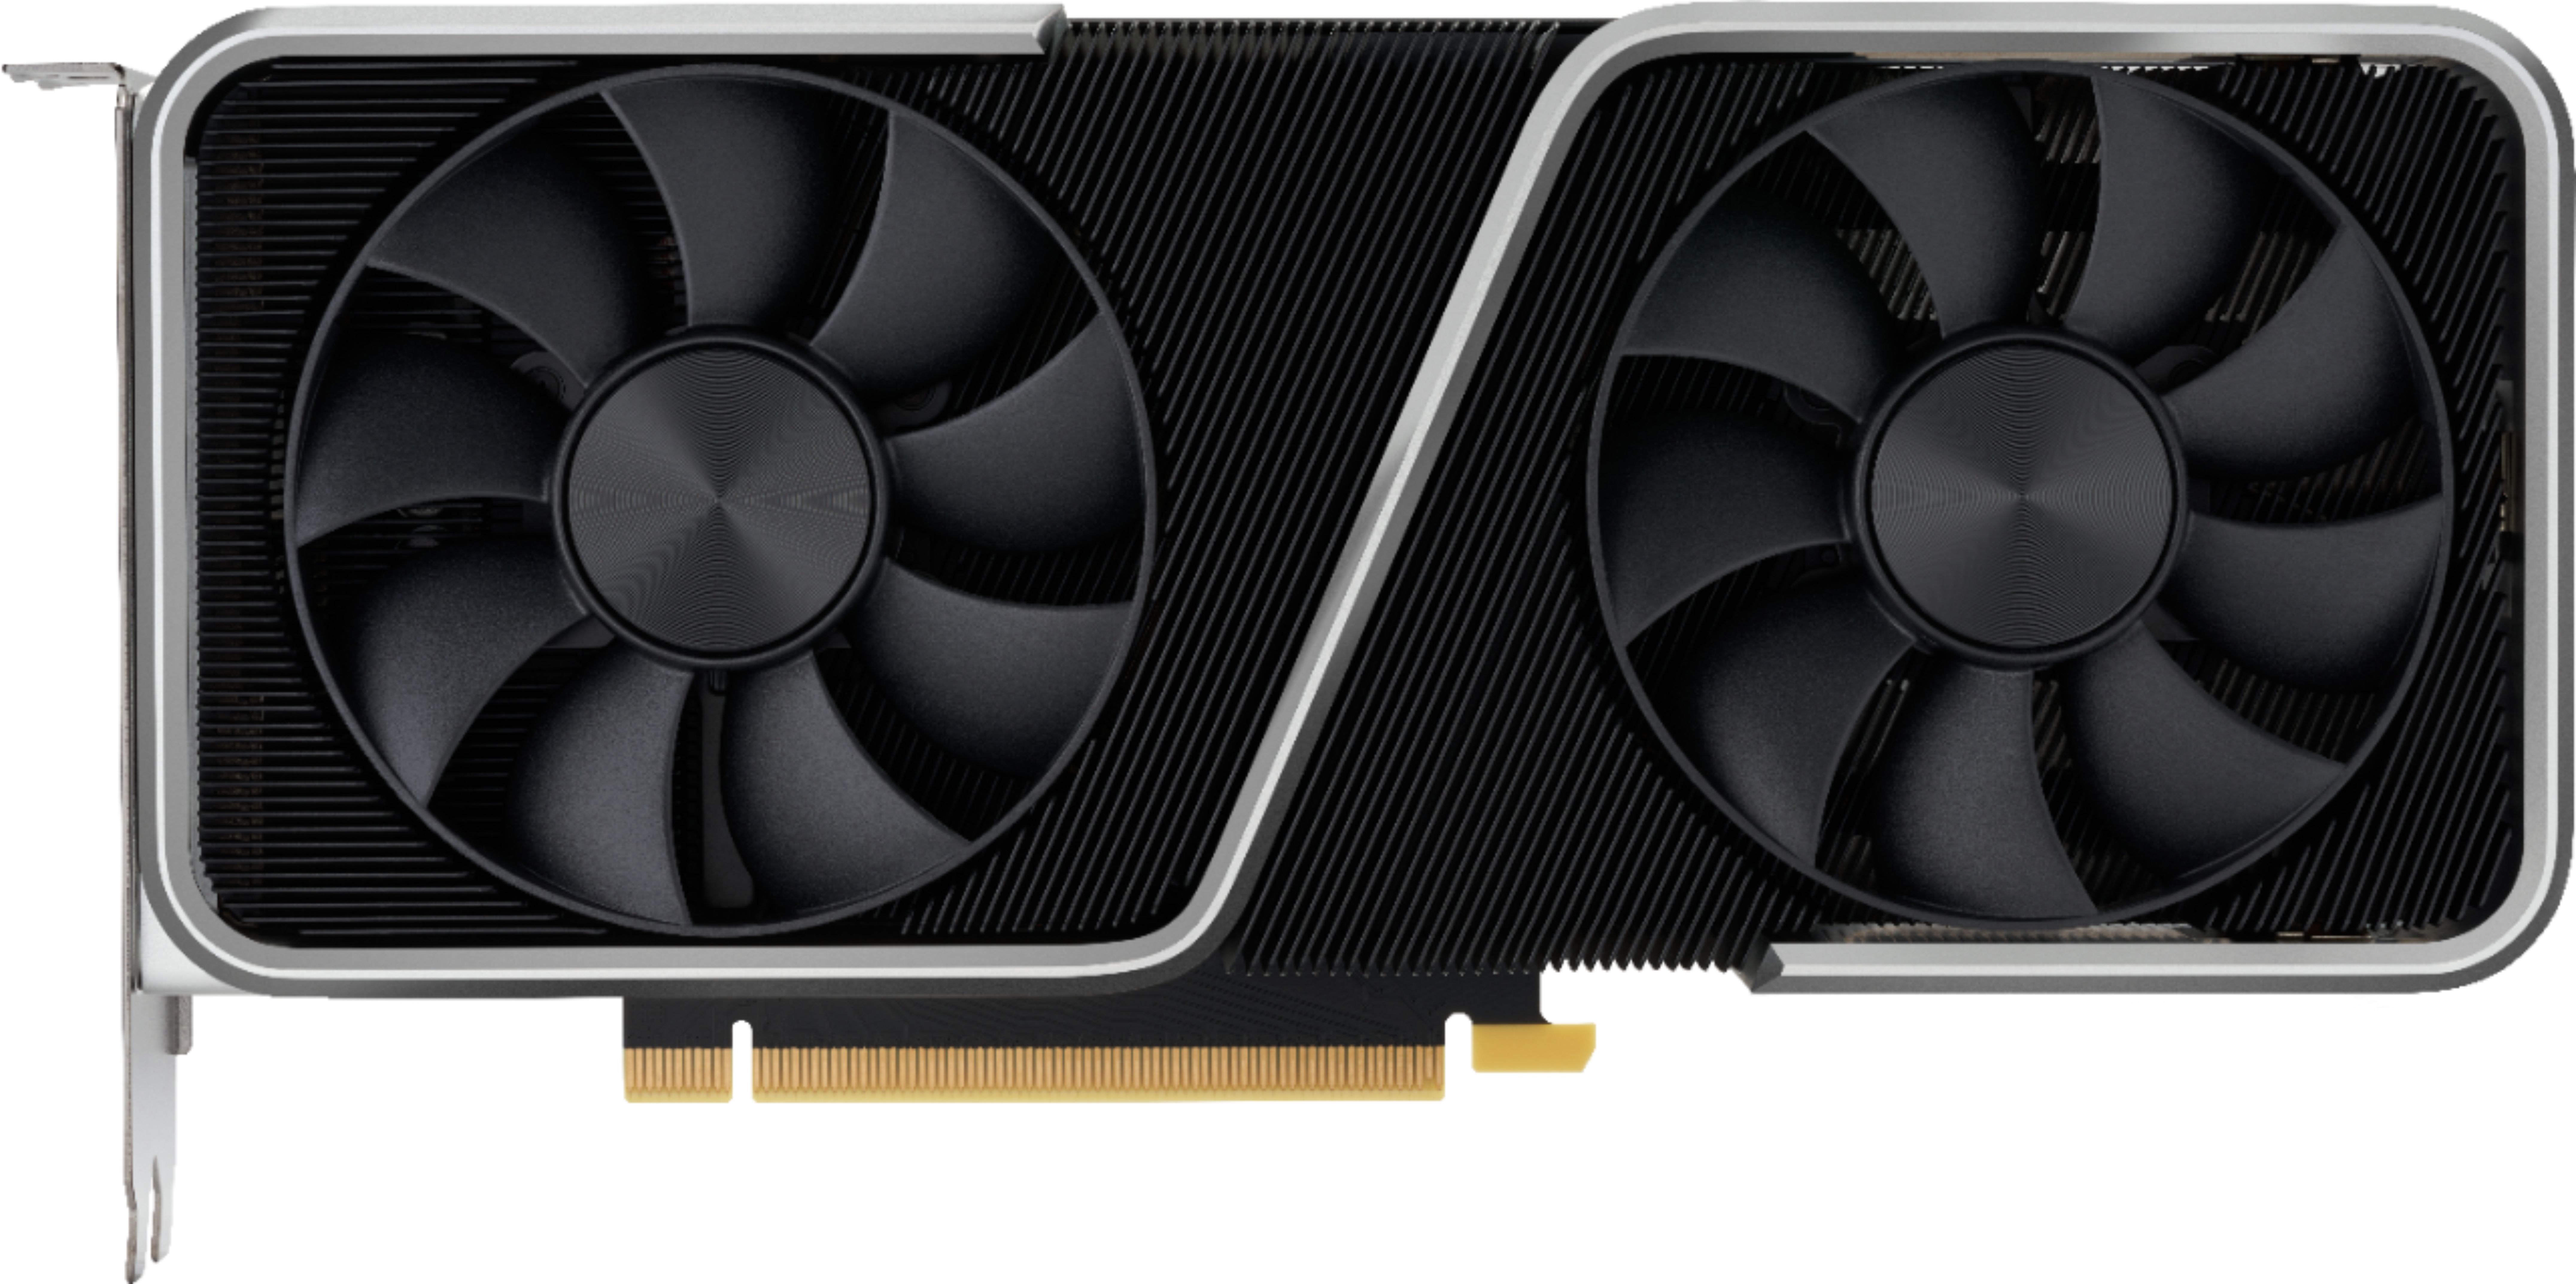 Nvidia Geforce Rtx 3060 Ti Founders Edition Im Test 1440p Ultra Und 4k Gaming Fur 400 Us Dollar Notebookcheck Com Tests